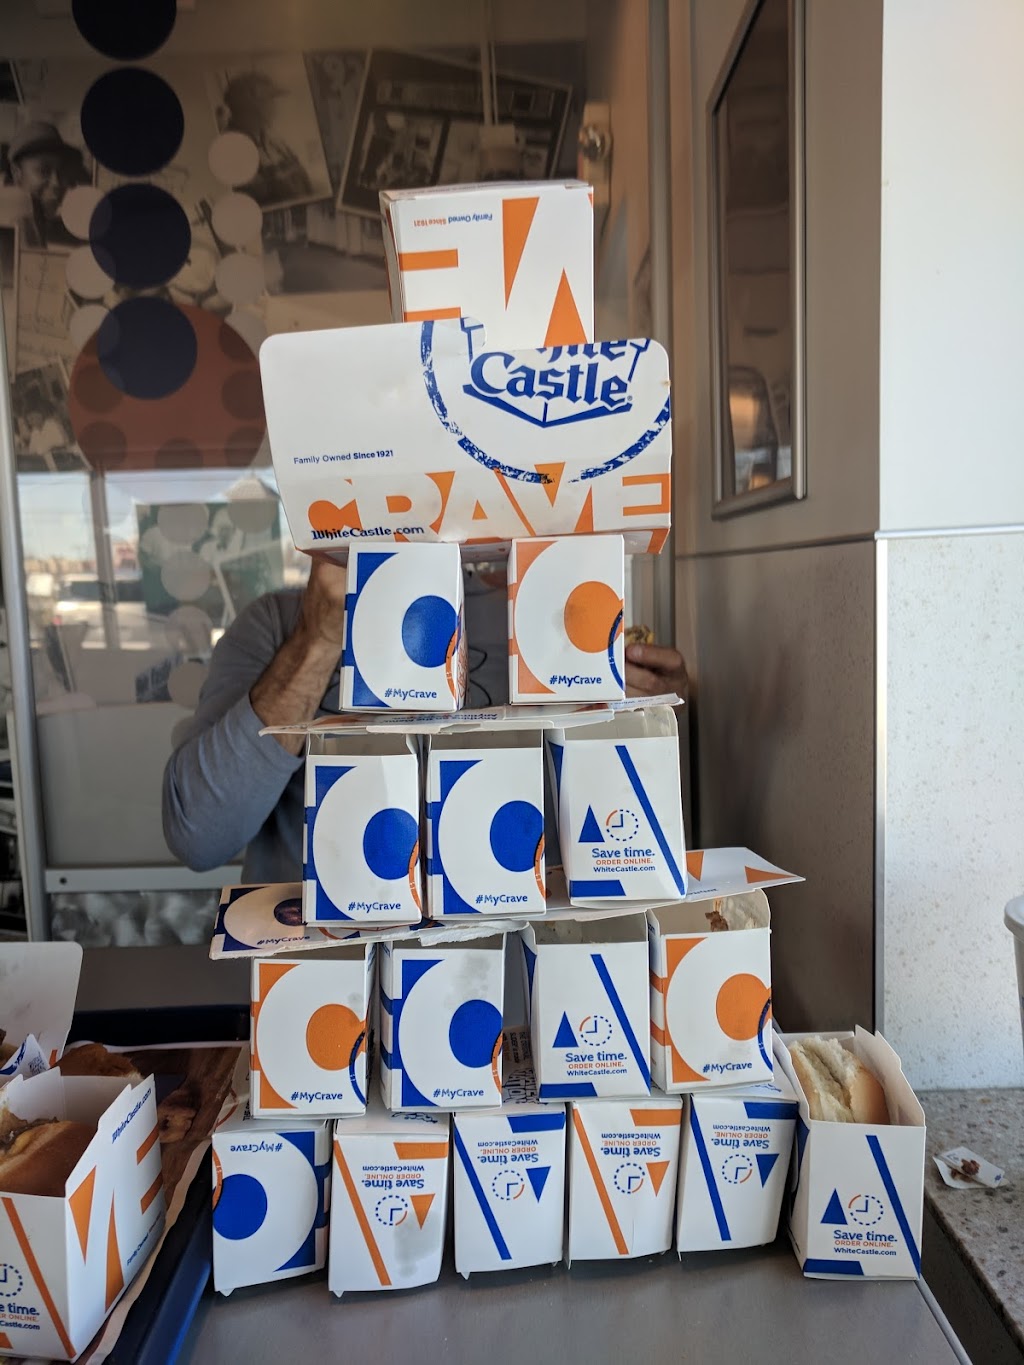 White Castle | 8787 Owenfield Dr, Powell, OH 43065, USA | Phone: (740) 549-1321